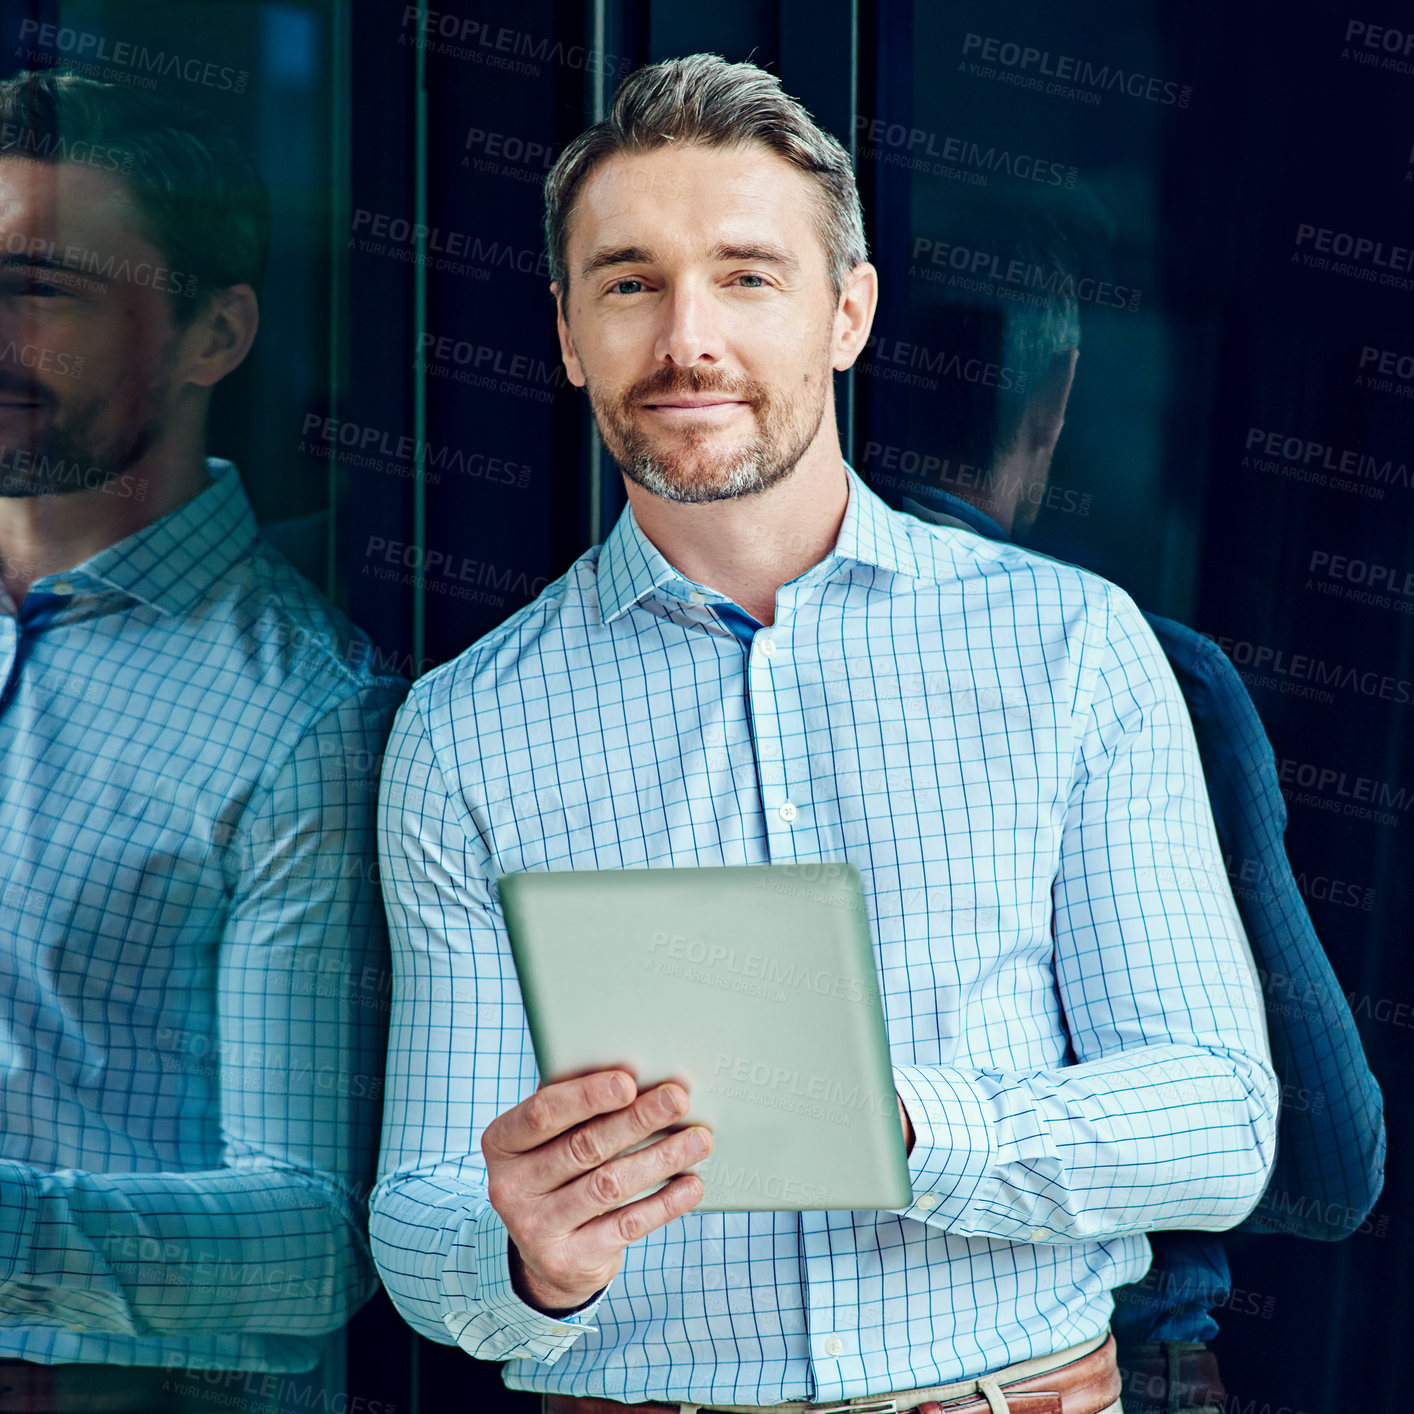 Buy stock photo Portrait of a businessman using a digital tablet at work